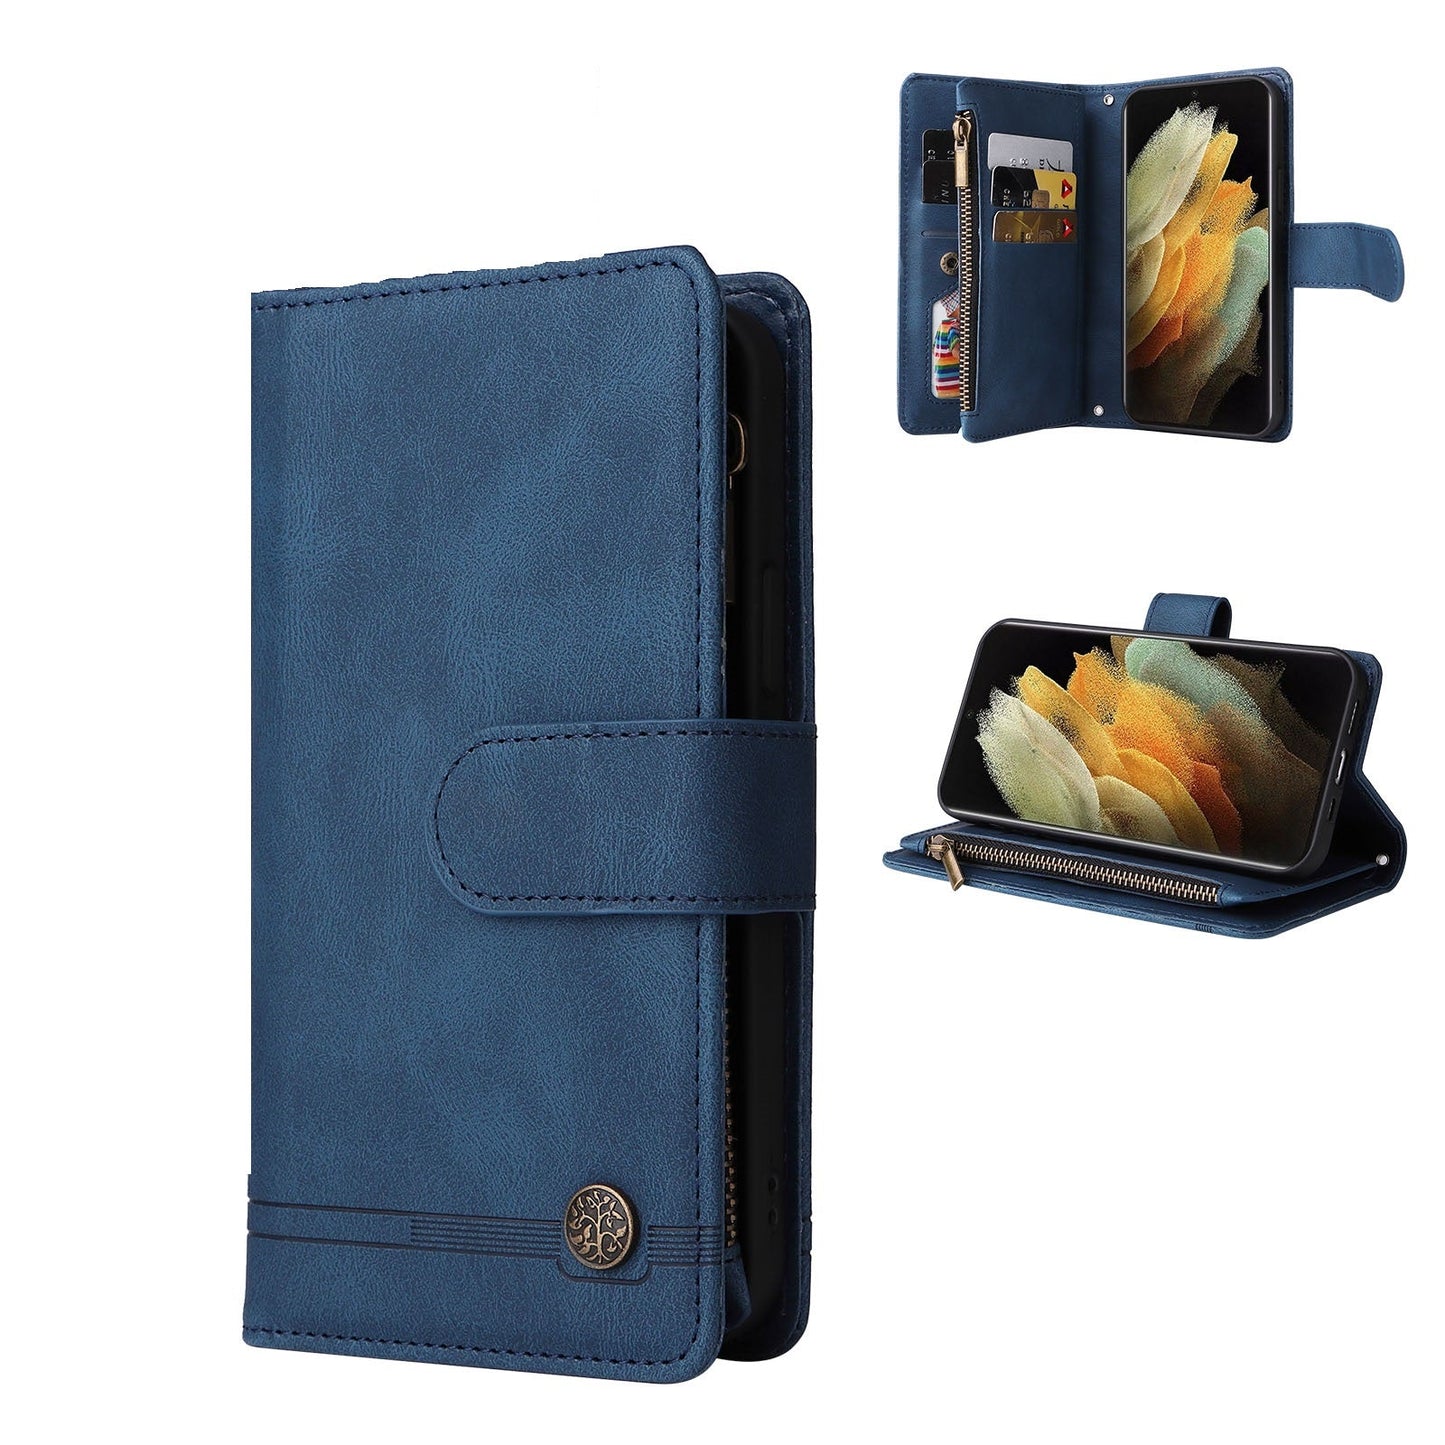 Samsung Galaxy S20 Plus Case Wallet Cover Blue